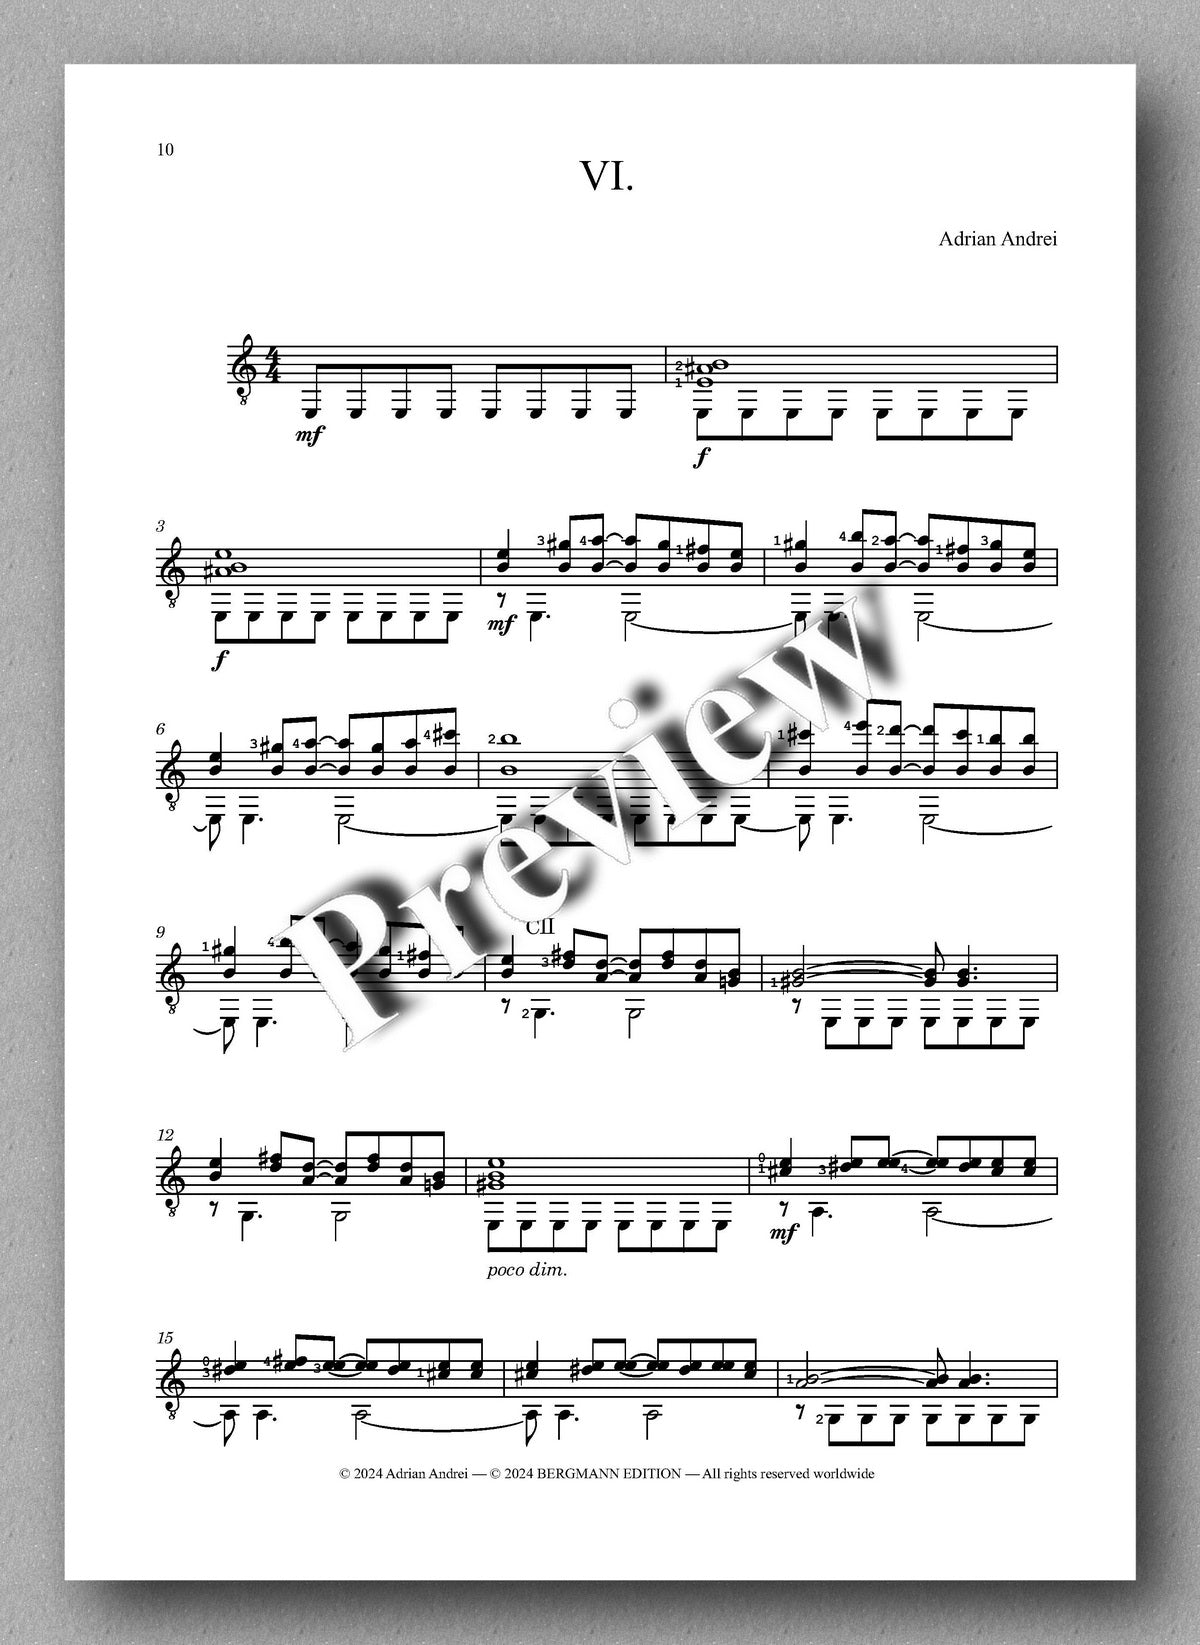 Adrian Andrei, Micro-suite imaginaire - preview of the music score 4